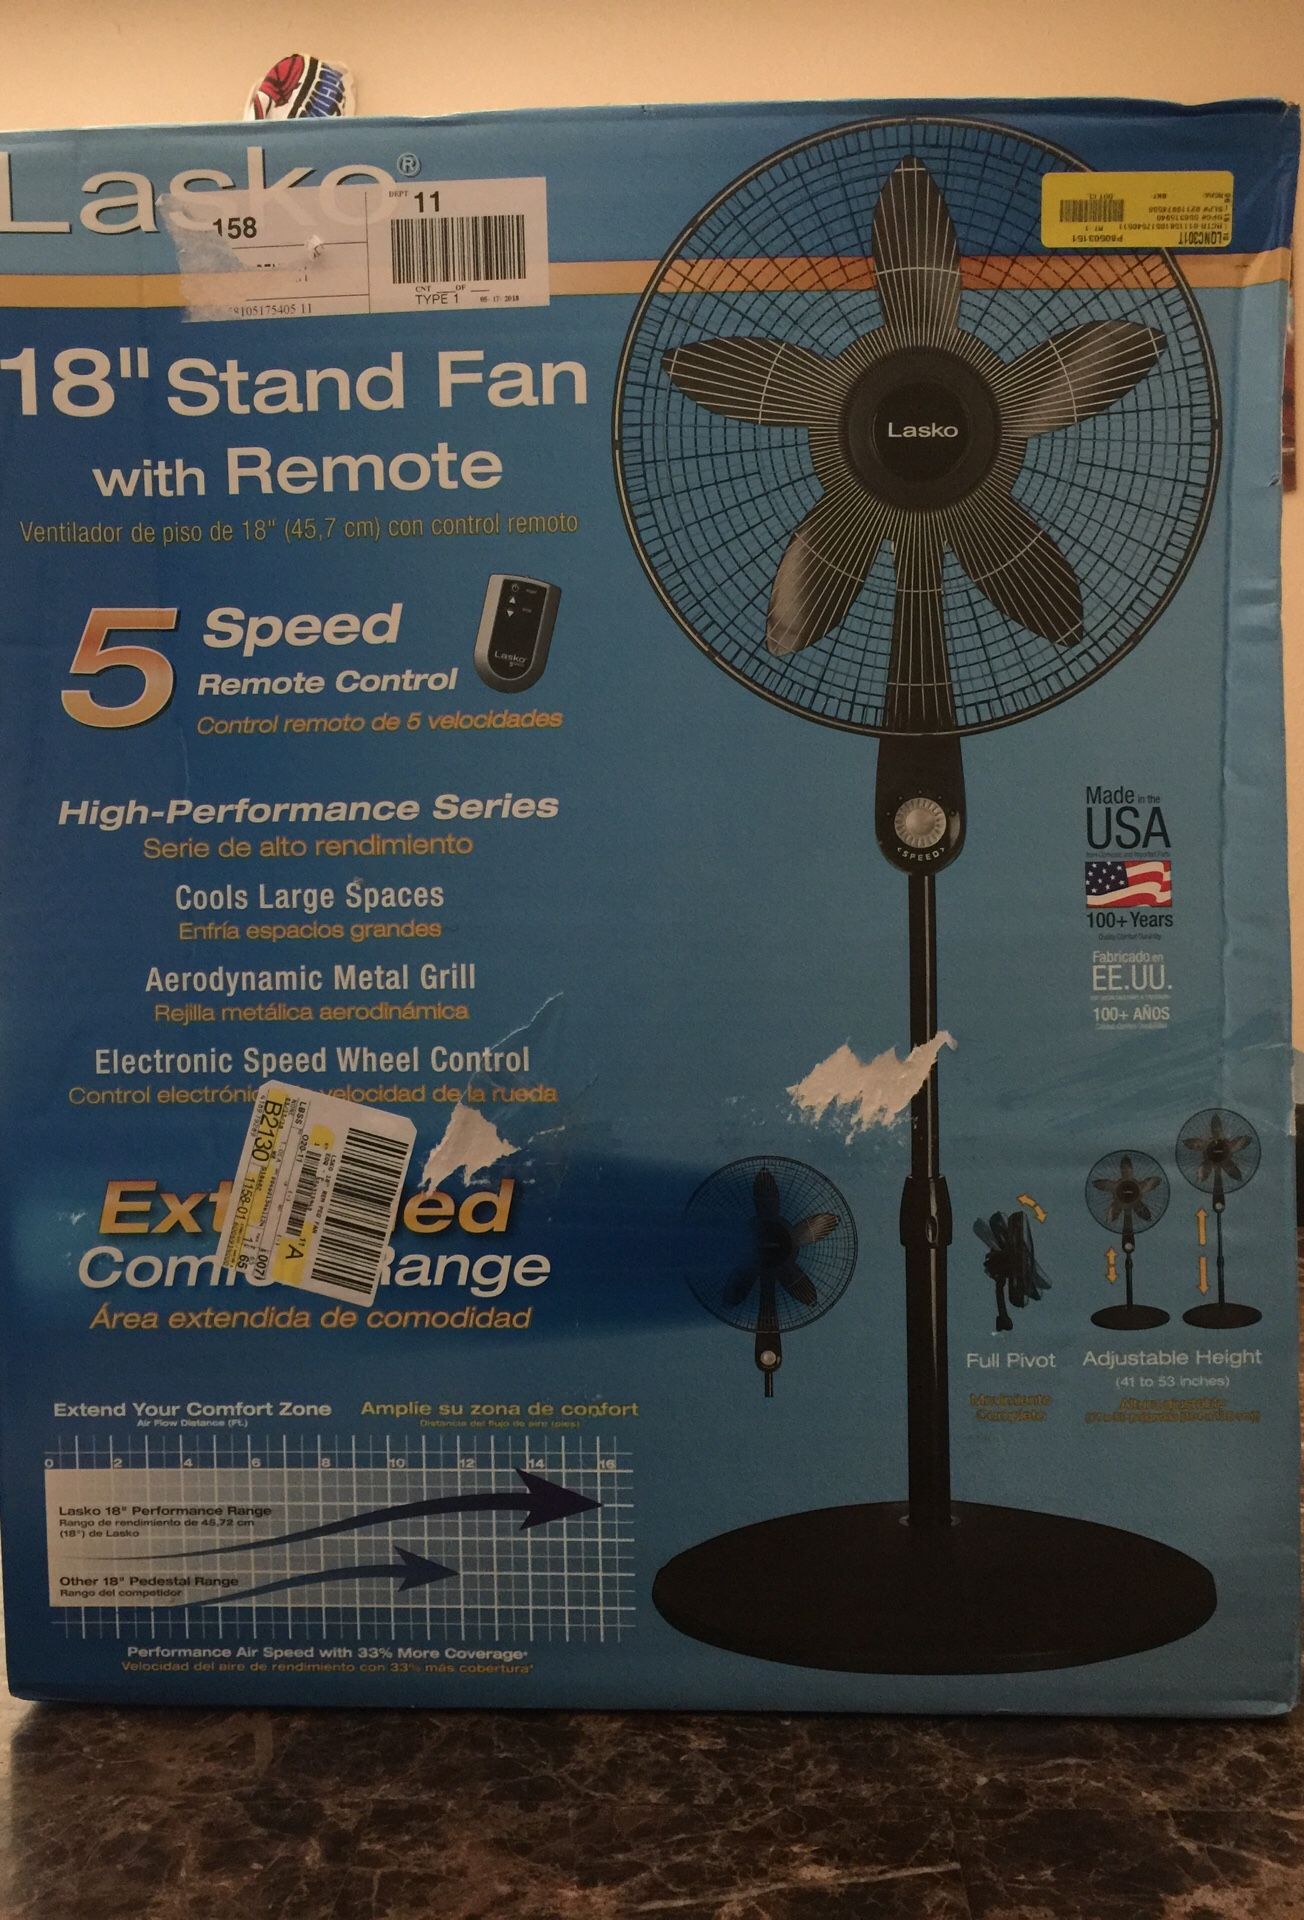 Lasko stand fan with remote control to change speeds